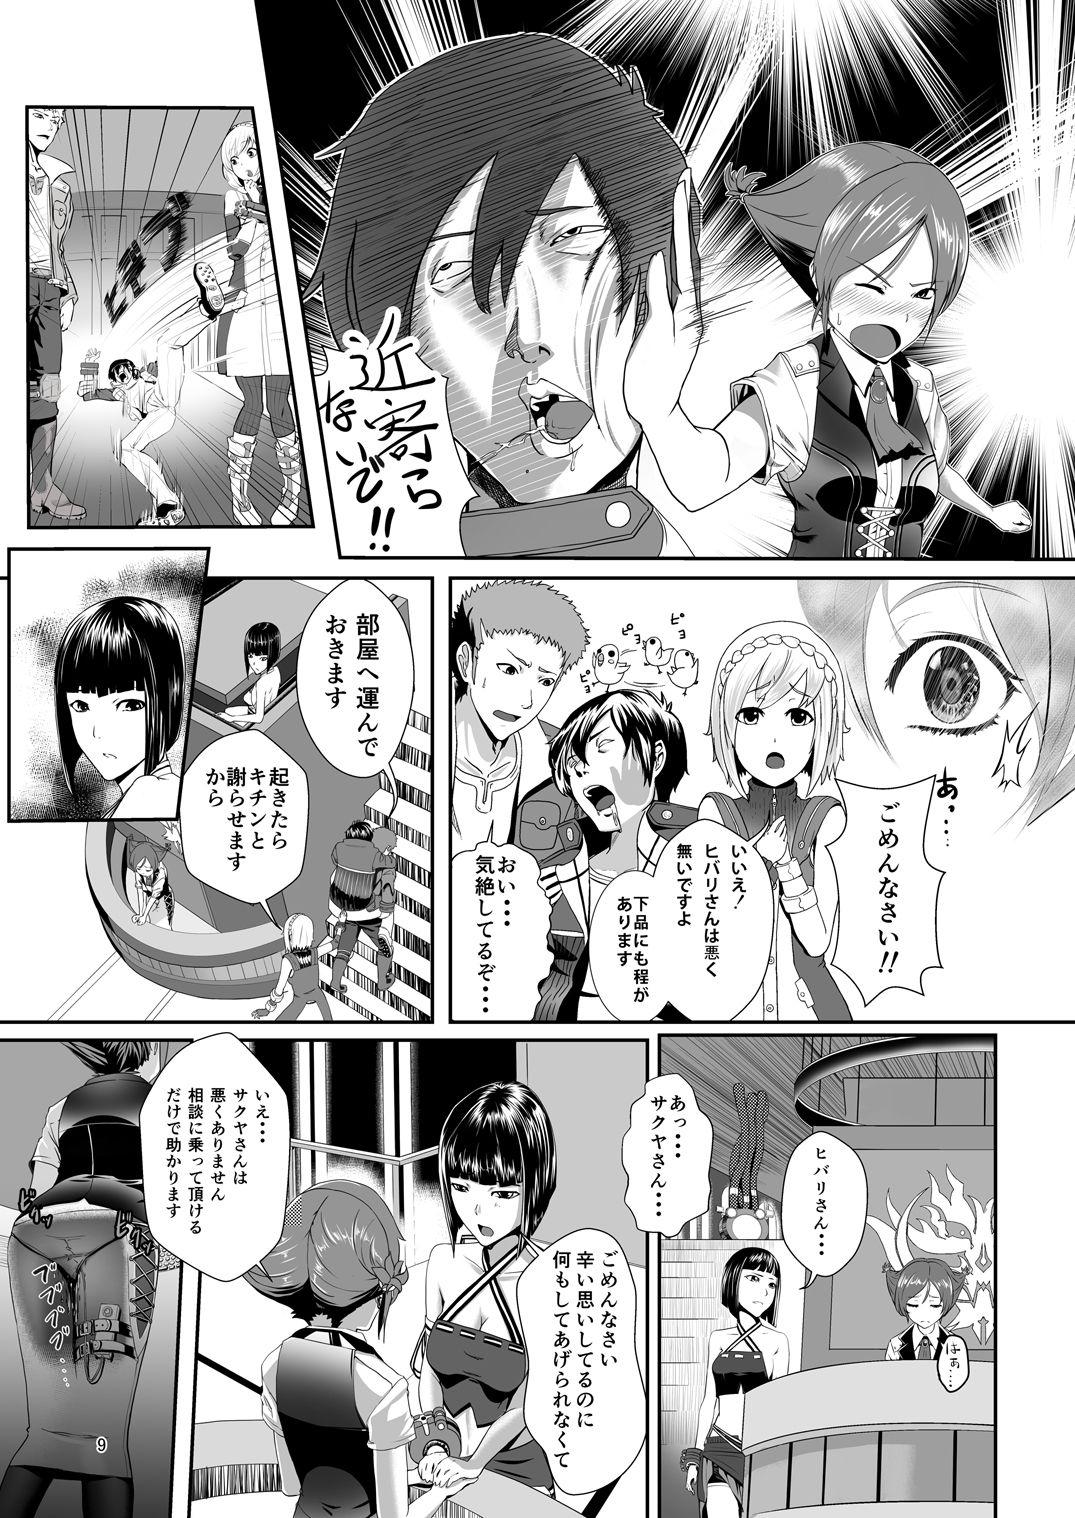 Forbidden COMPULSION EATER Vol. 2 - God eater Sex Toy - Page 9